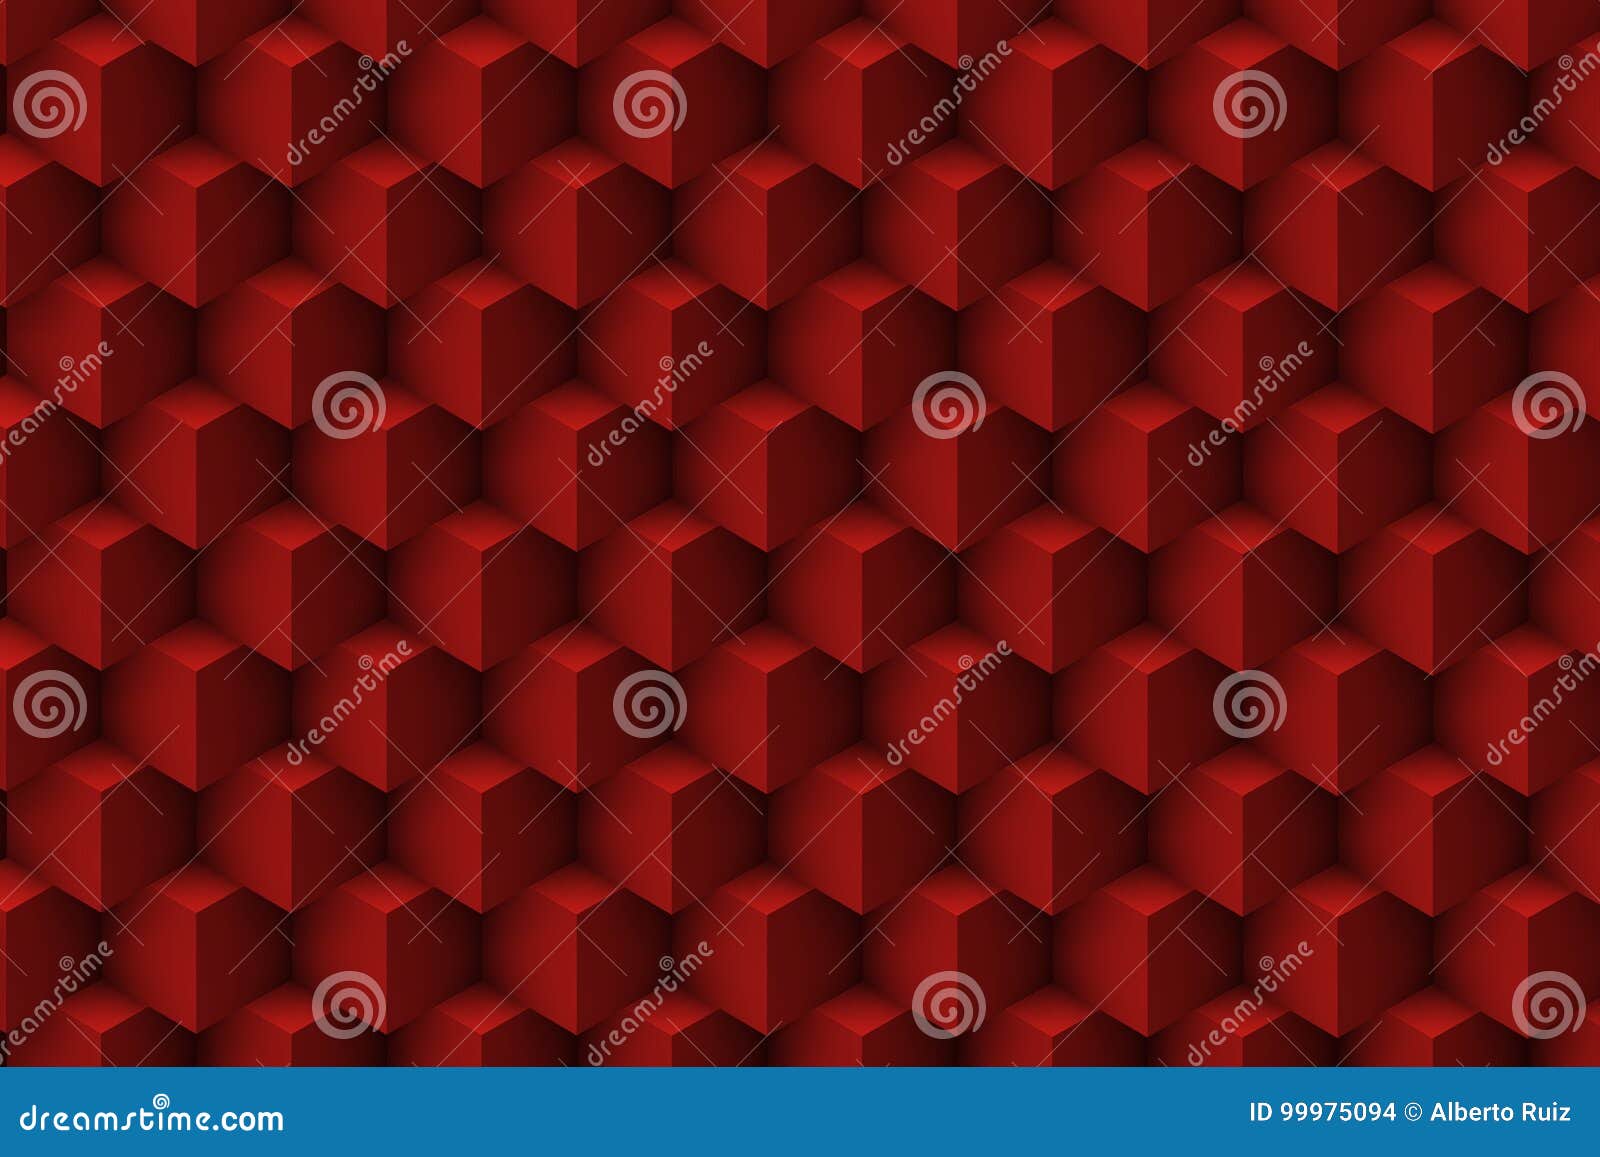 red architectonic 3d abstract